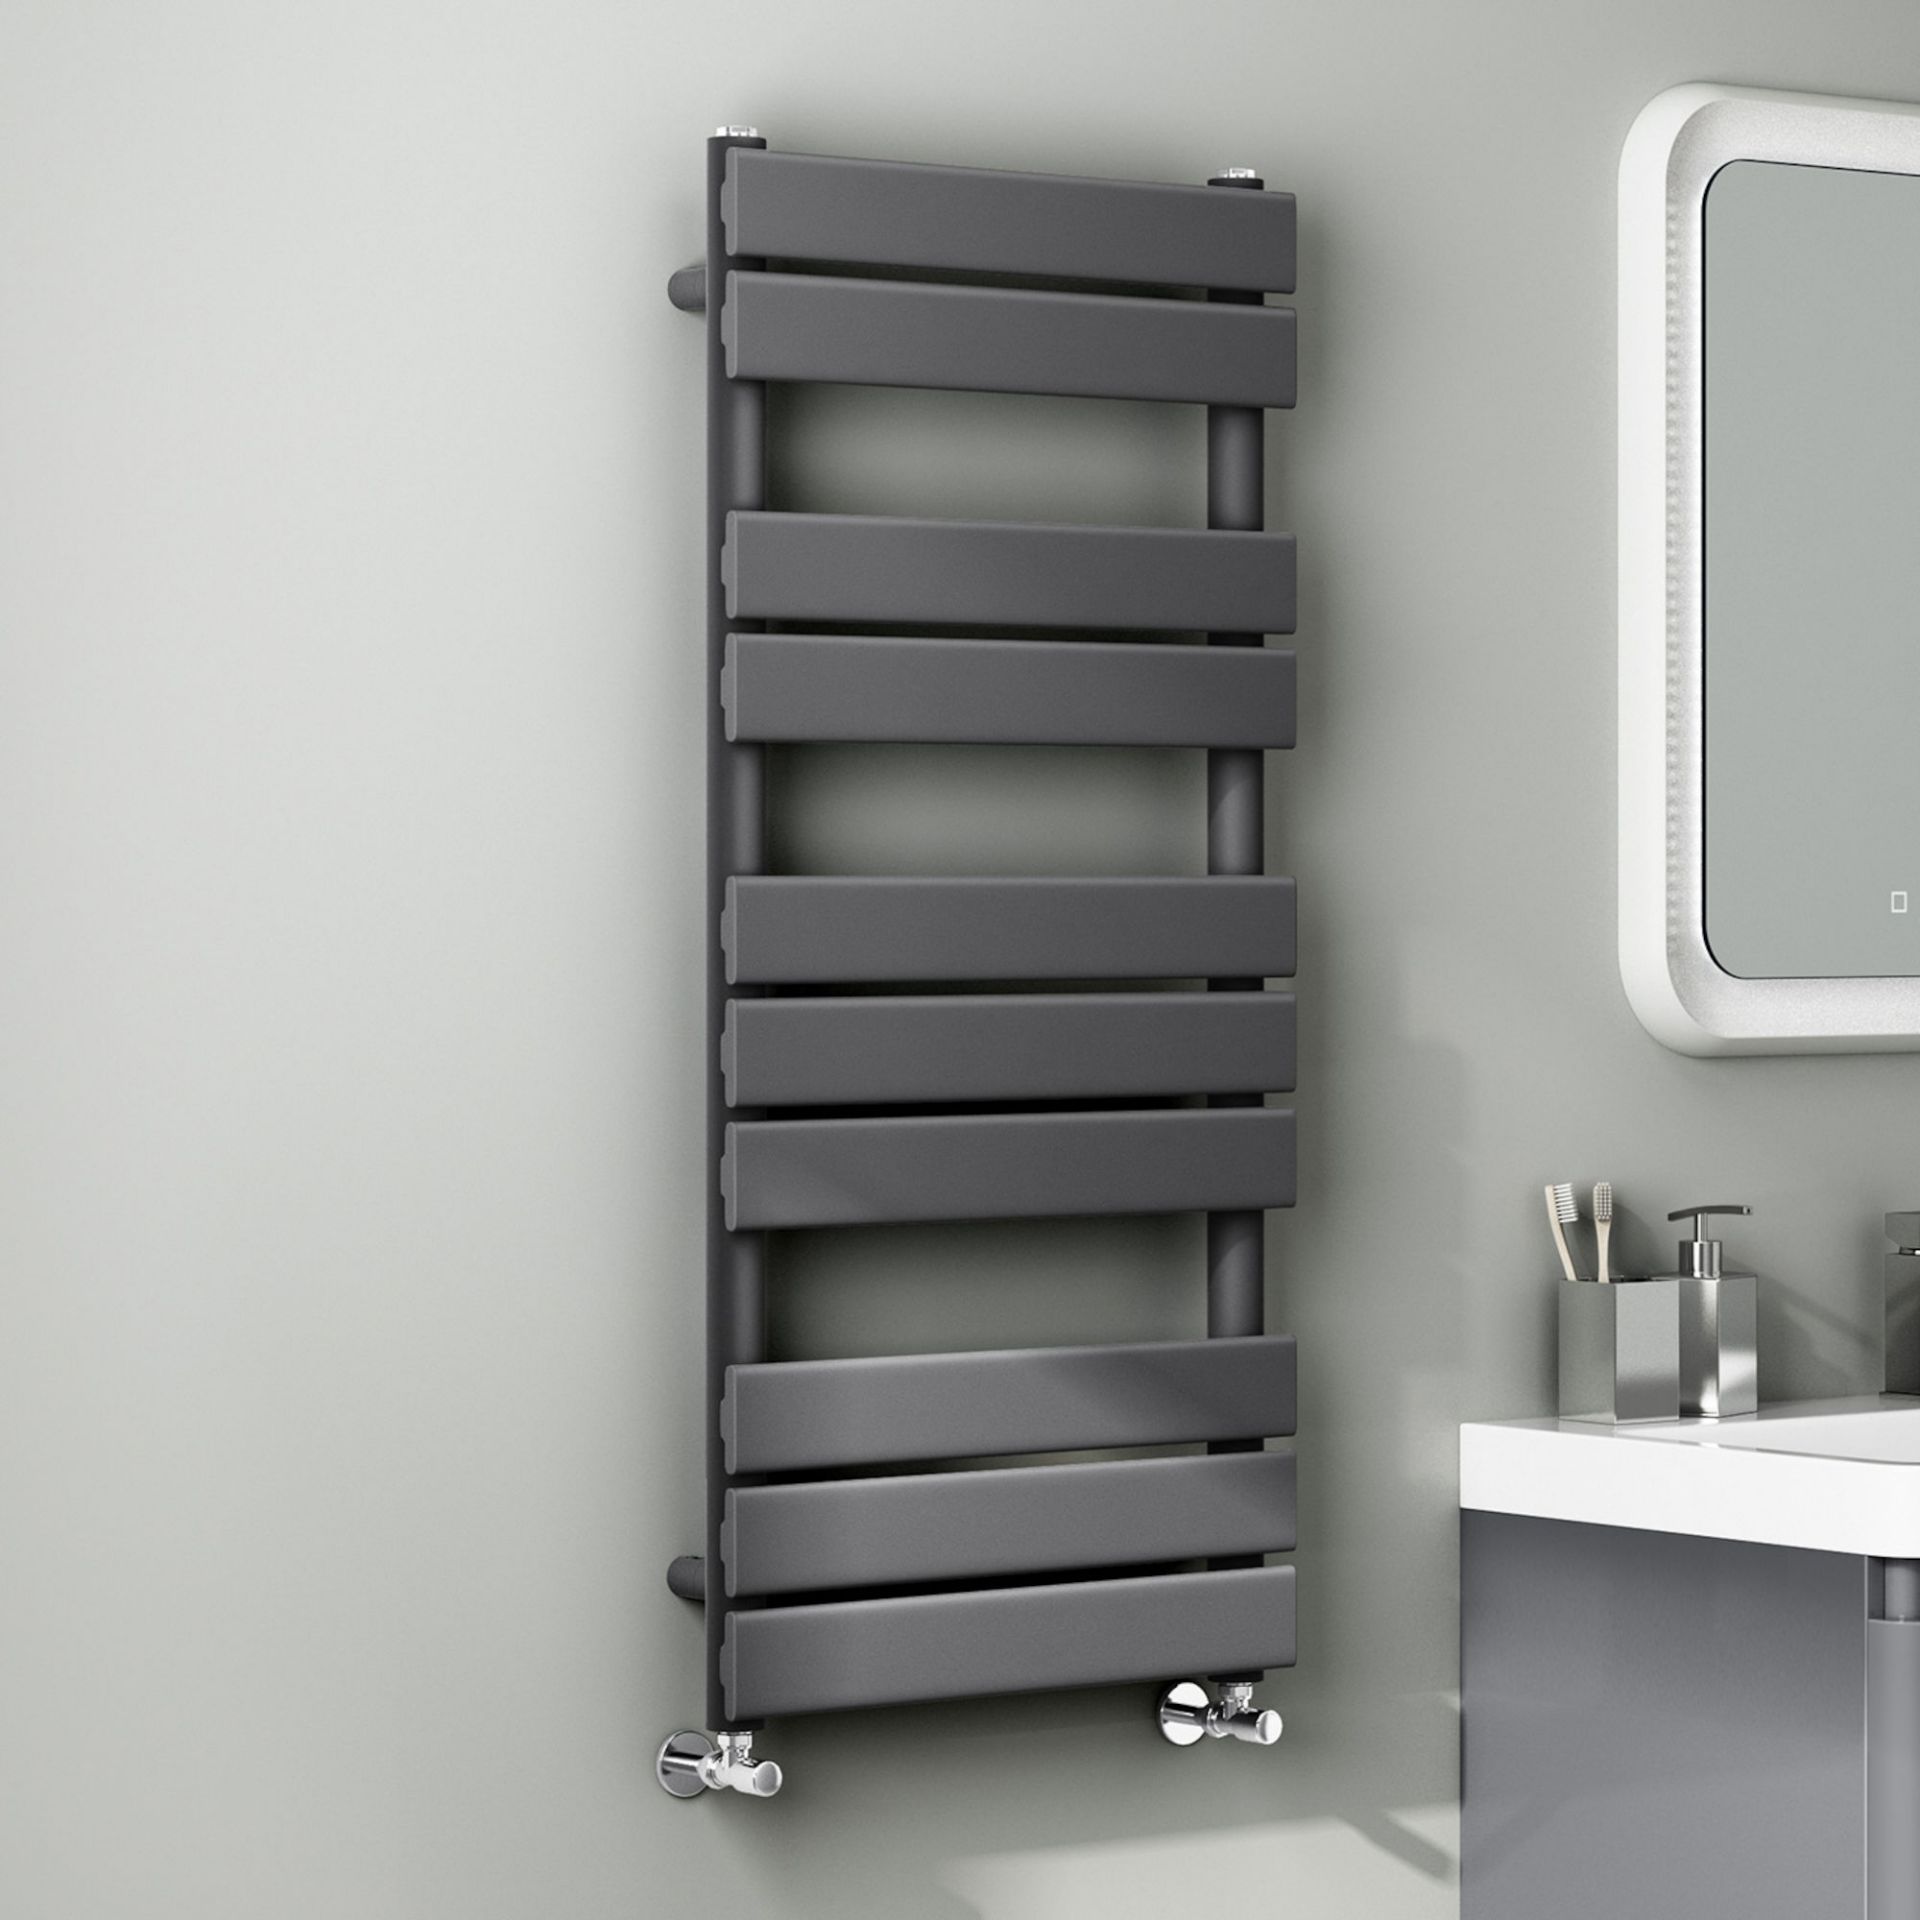 (AA48) 1000x450mm Anthracite Flat Panel Ladder Towel Radiator. RRP £359.99. Incredibly trendy ...